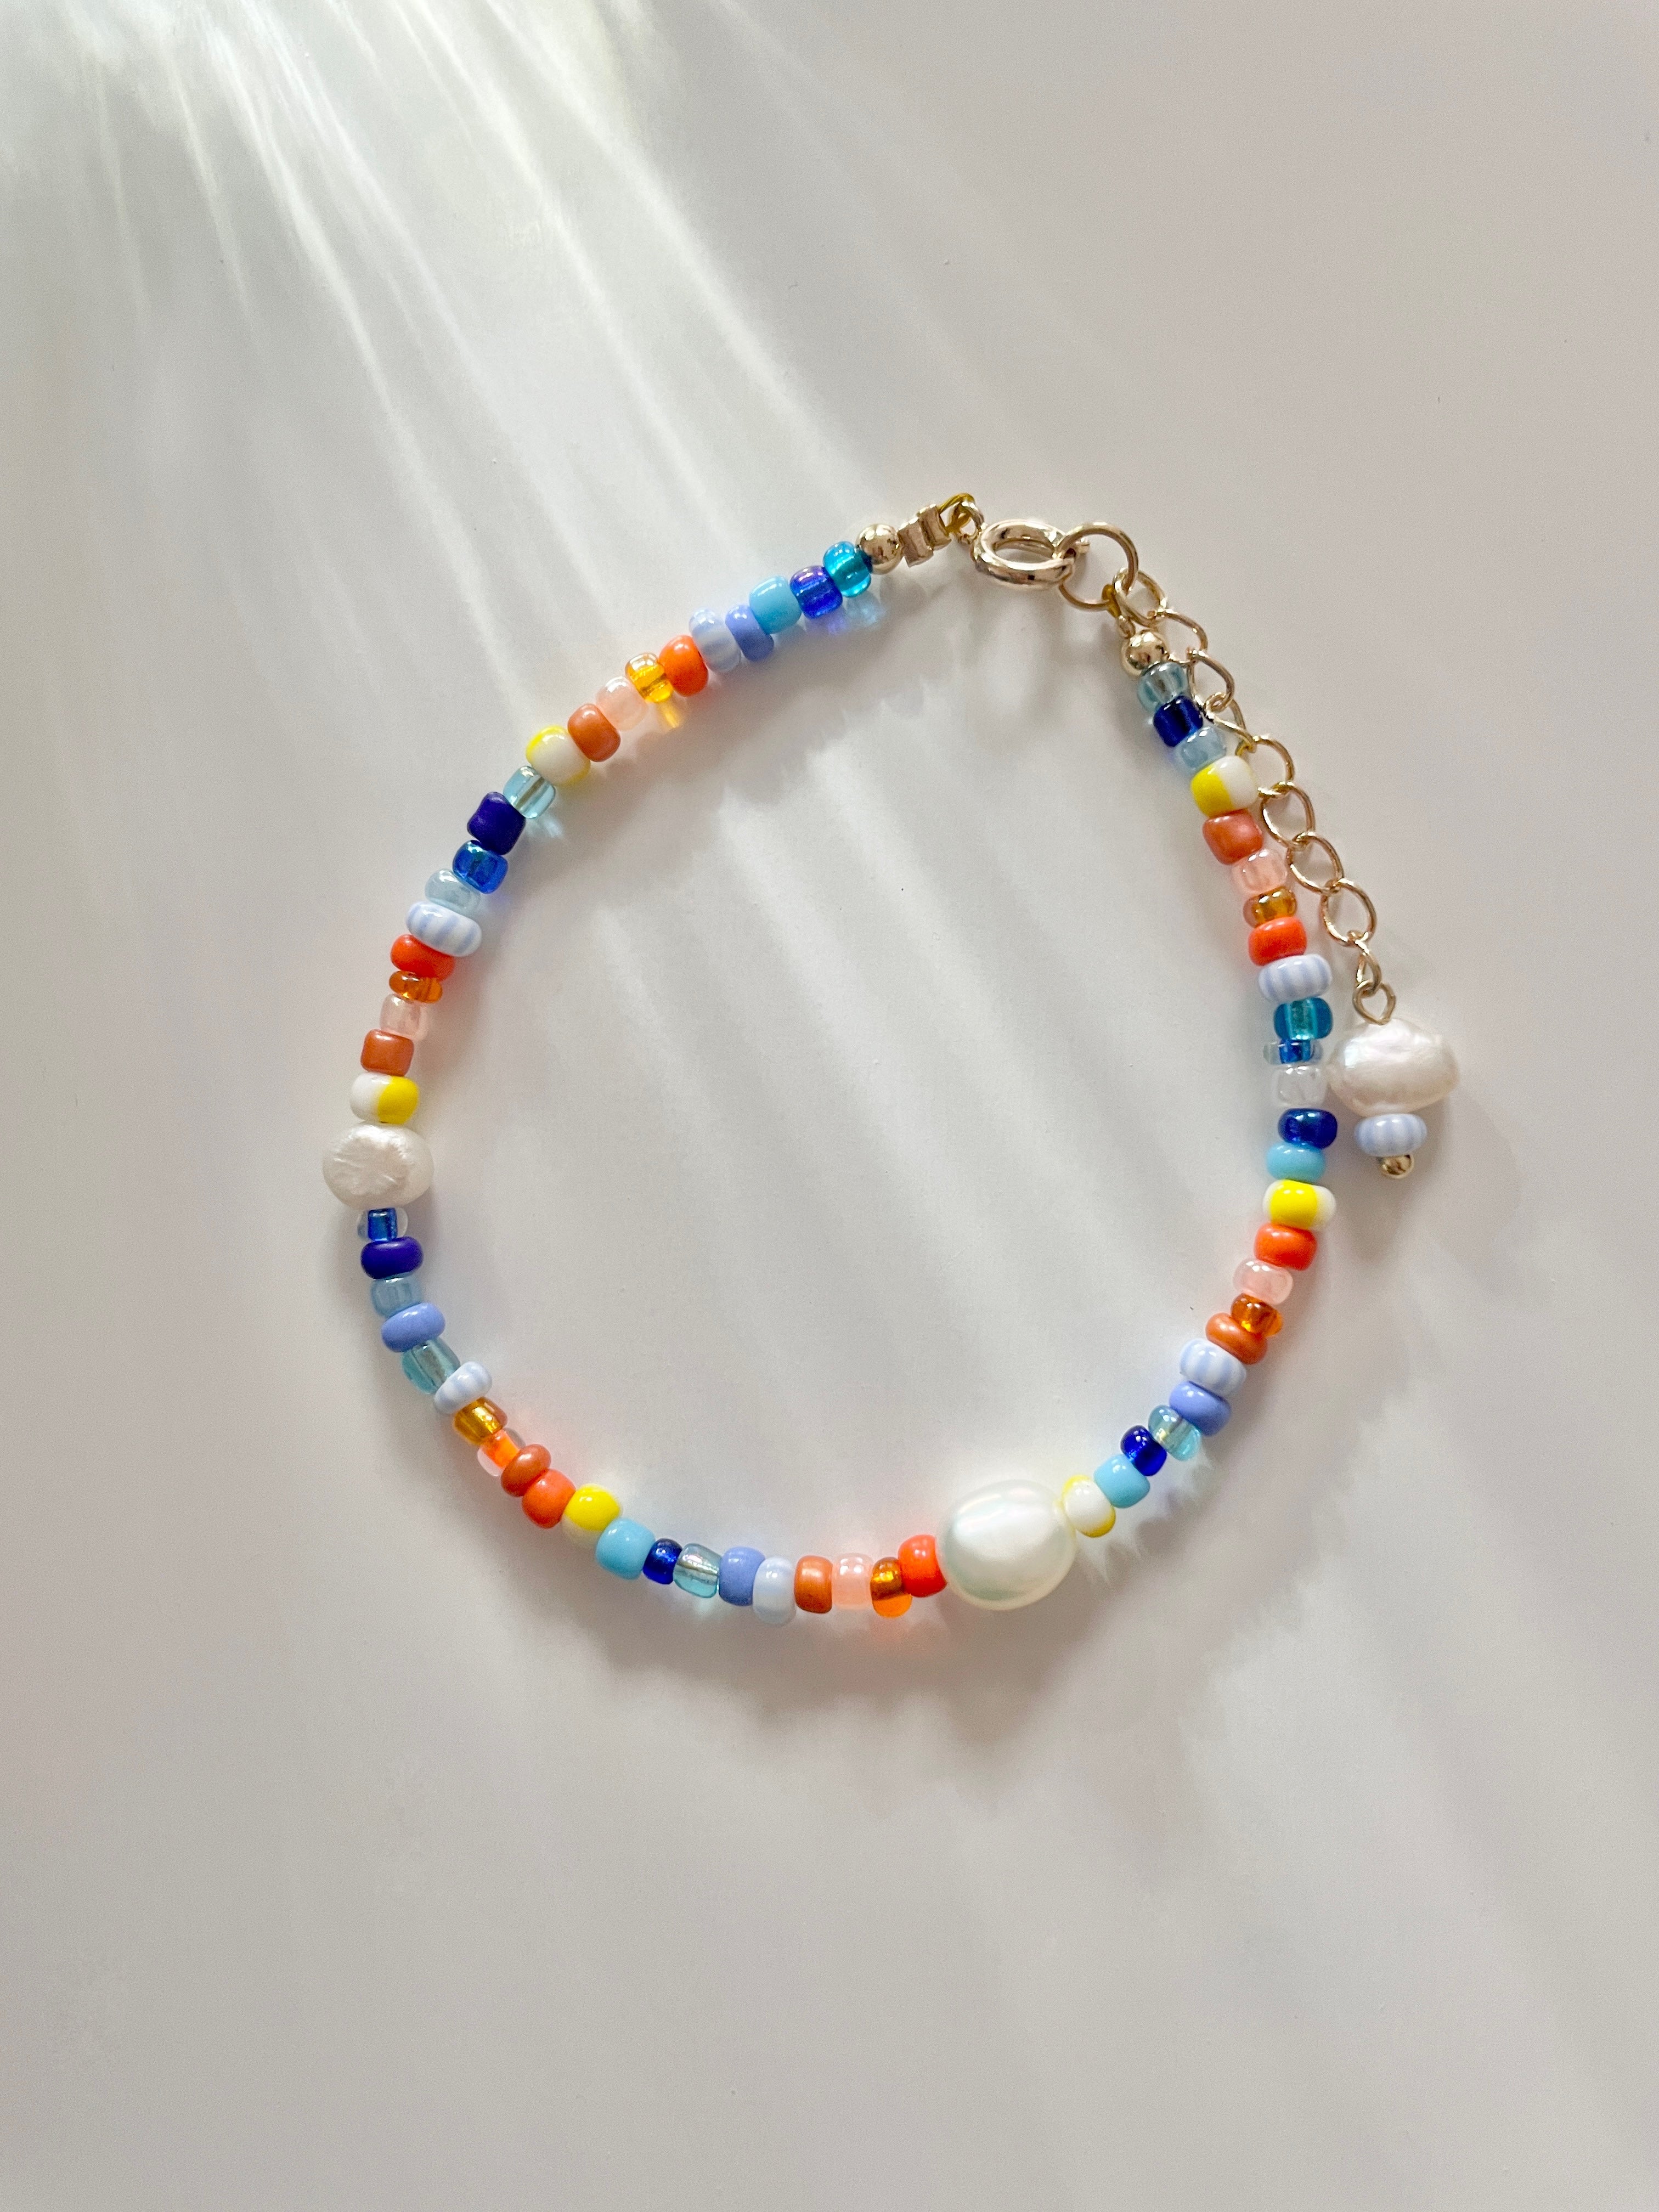 4ver young - SUNSET OF FALL Bracelets – MissCloudyStudio